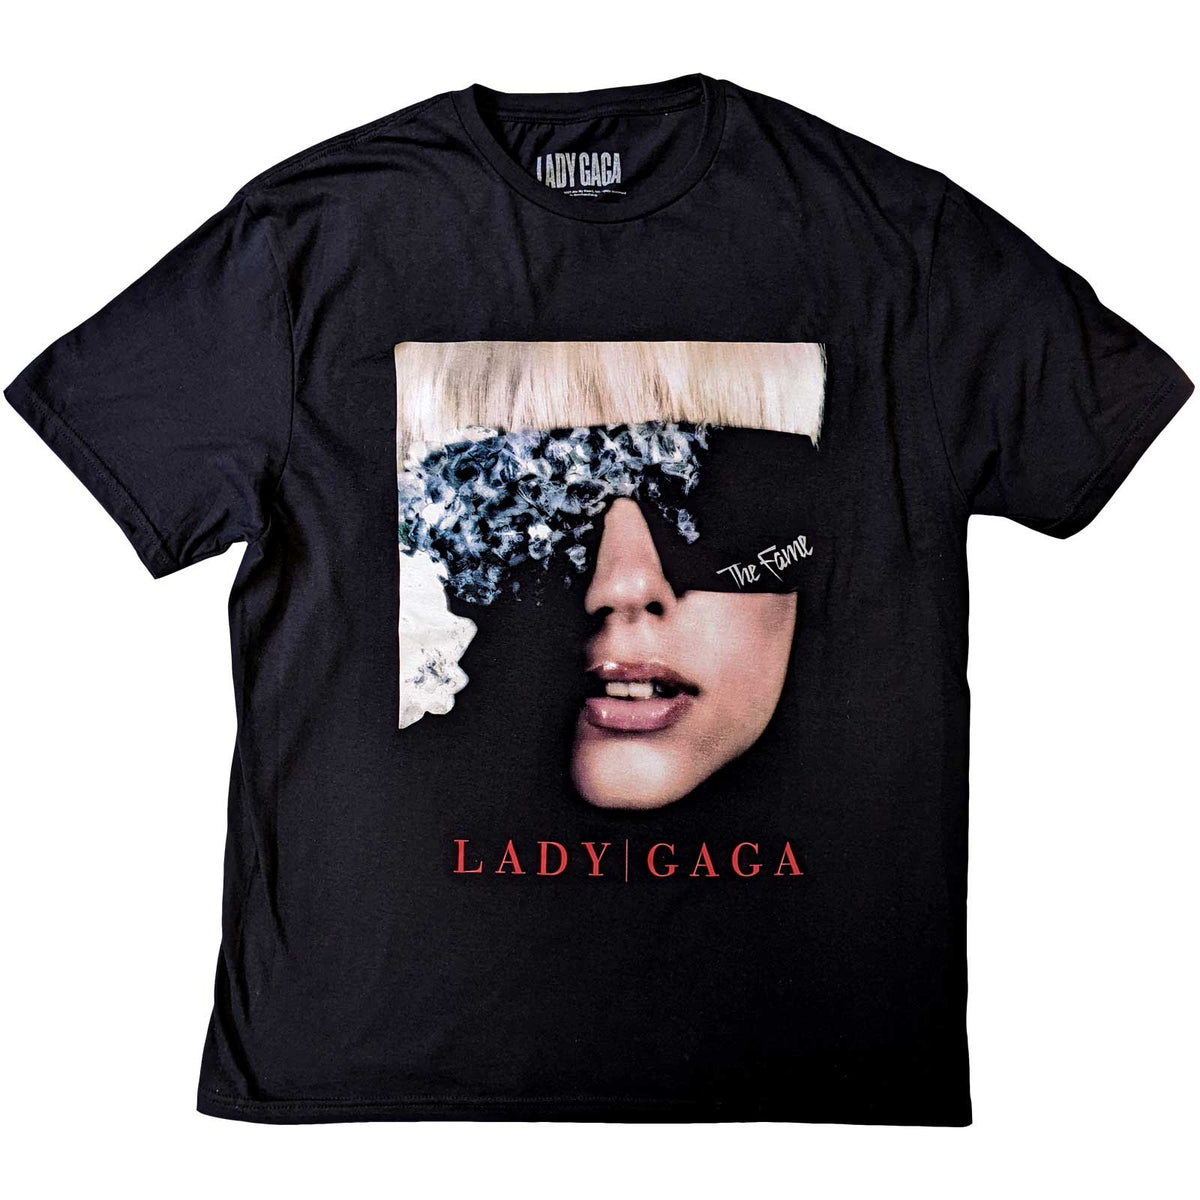 T-shirt Lady Gaga - The Fame Photo - Conception unisexe sous licence officielle